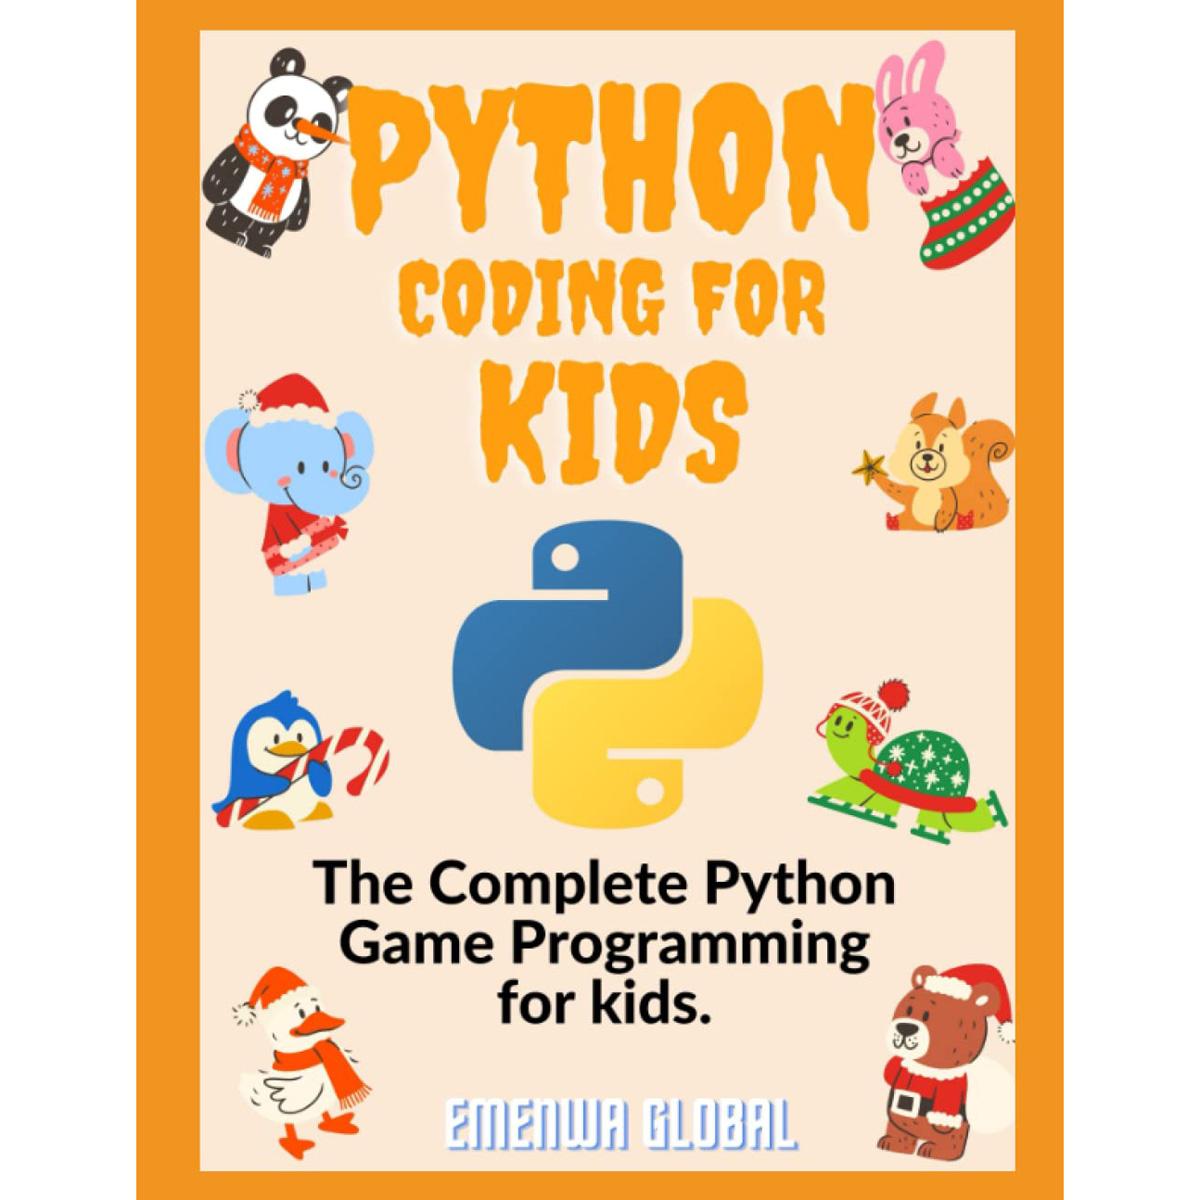 Python Coding For Kids eBook for $0.99